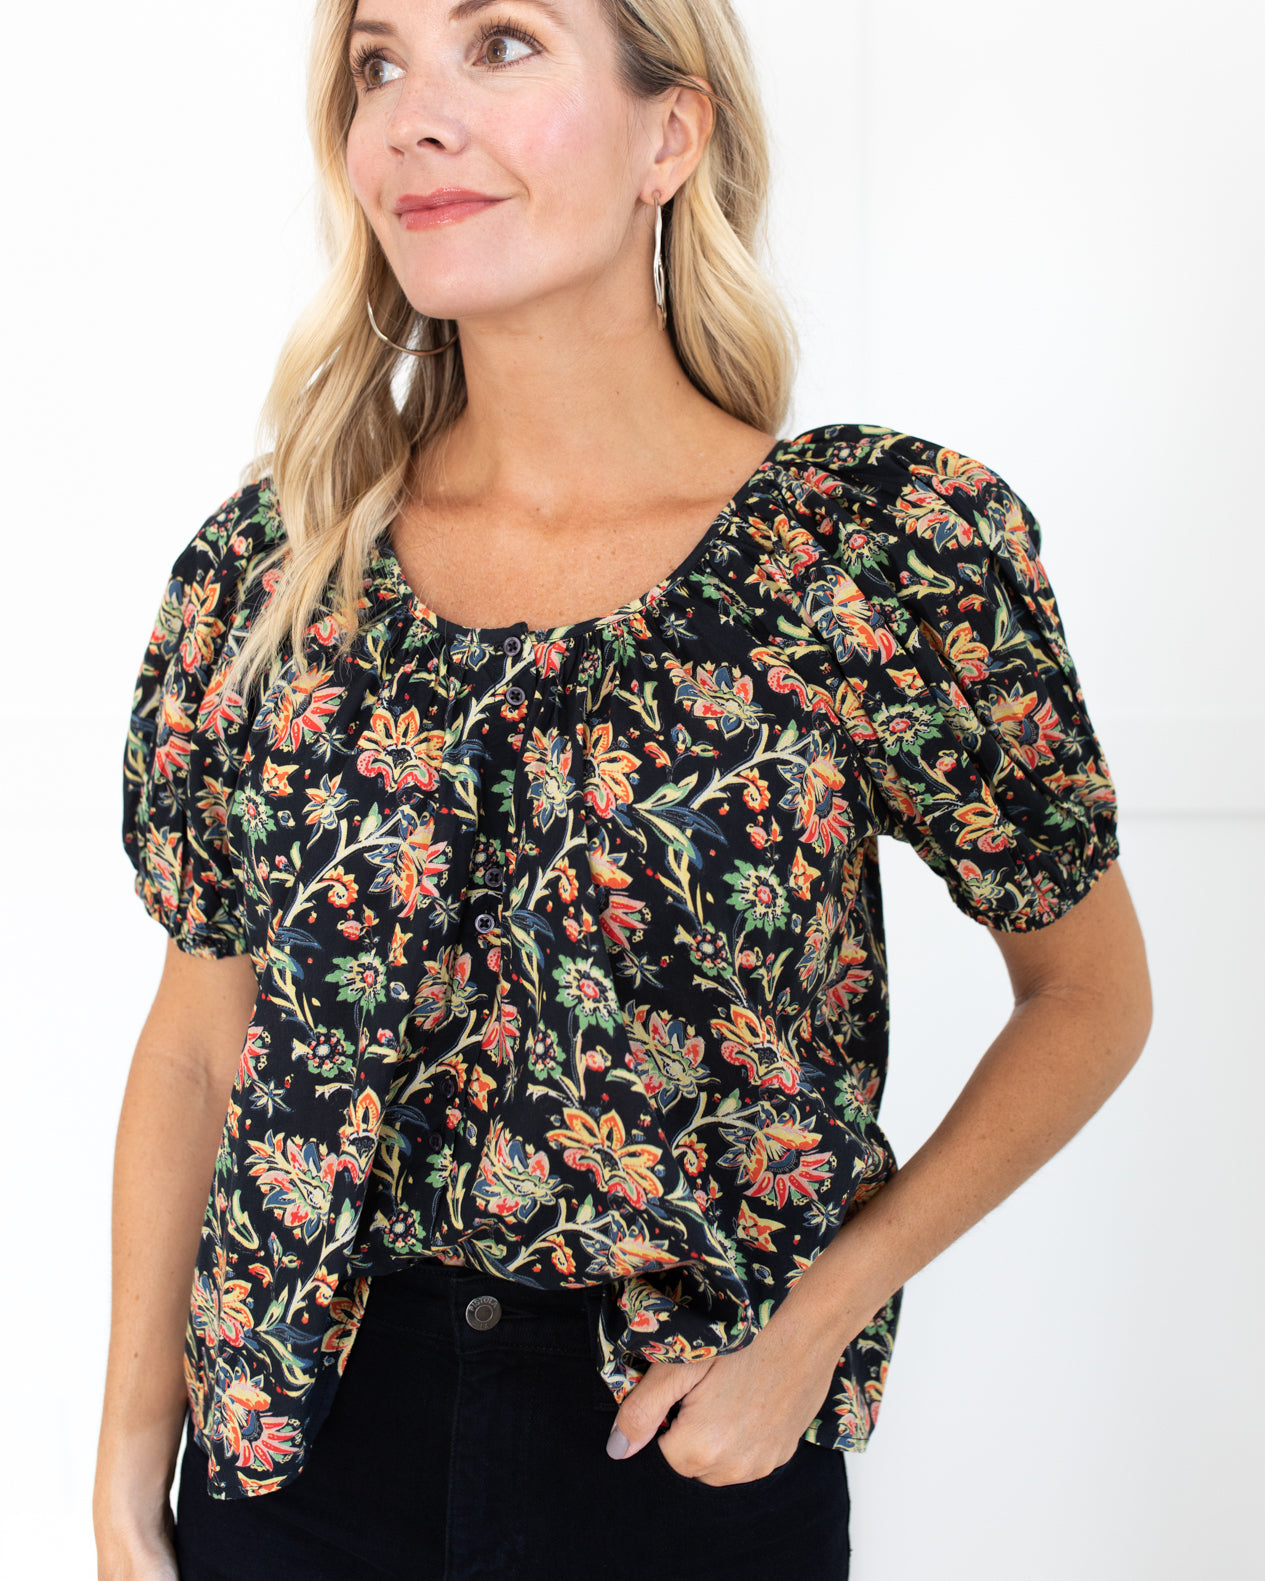 The Porch Top in Black Paisley Floral